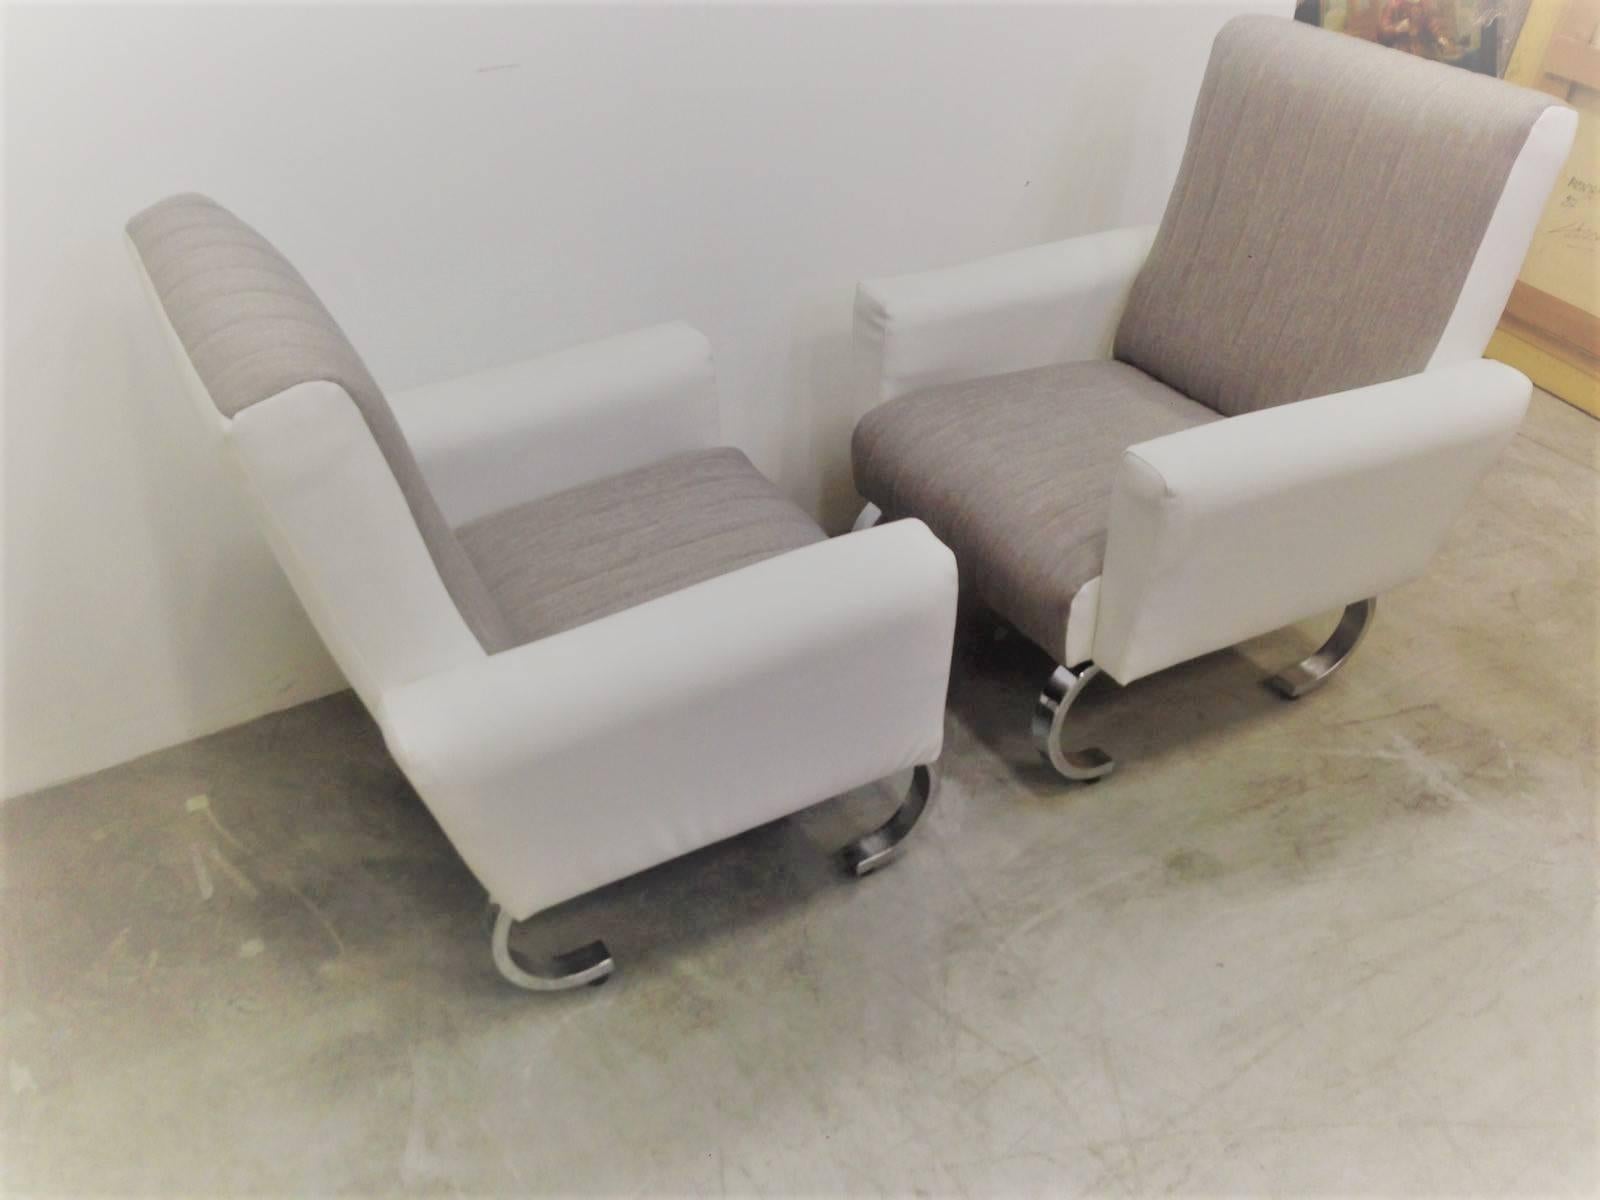 Mid-Century Modern exclusive pair of sleek Italian armchairs with metal base.
Pair of wildly stylish Mid-Century tall back lounge chairs of aerodynamic design with original curved nickeled iron bases.
The backrest and seats have been newly